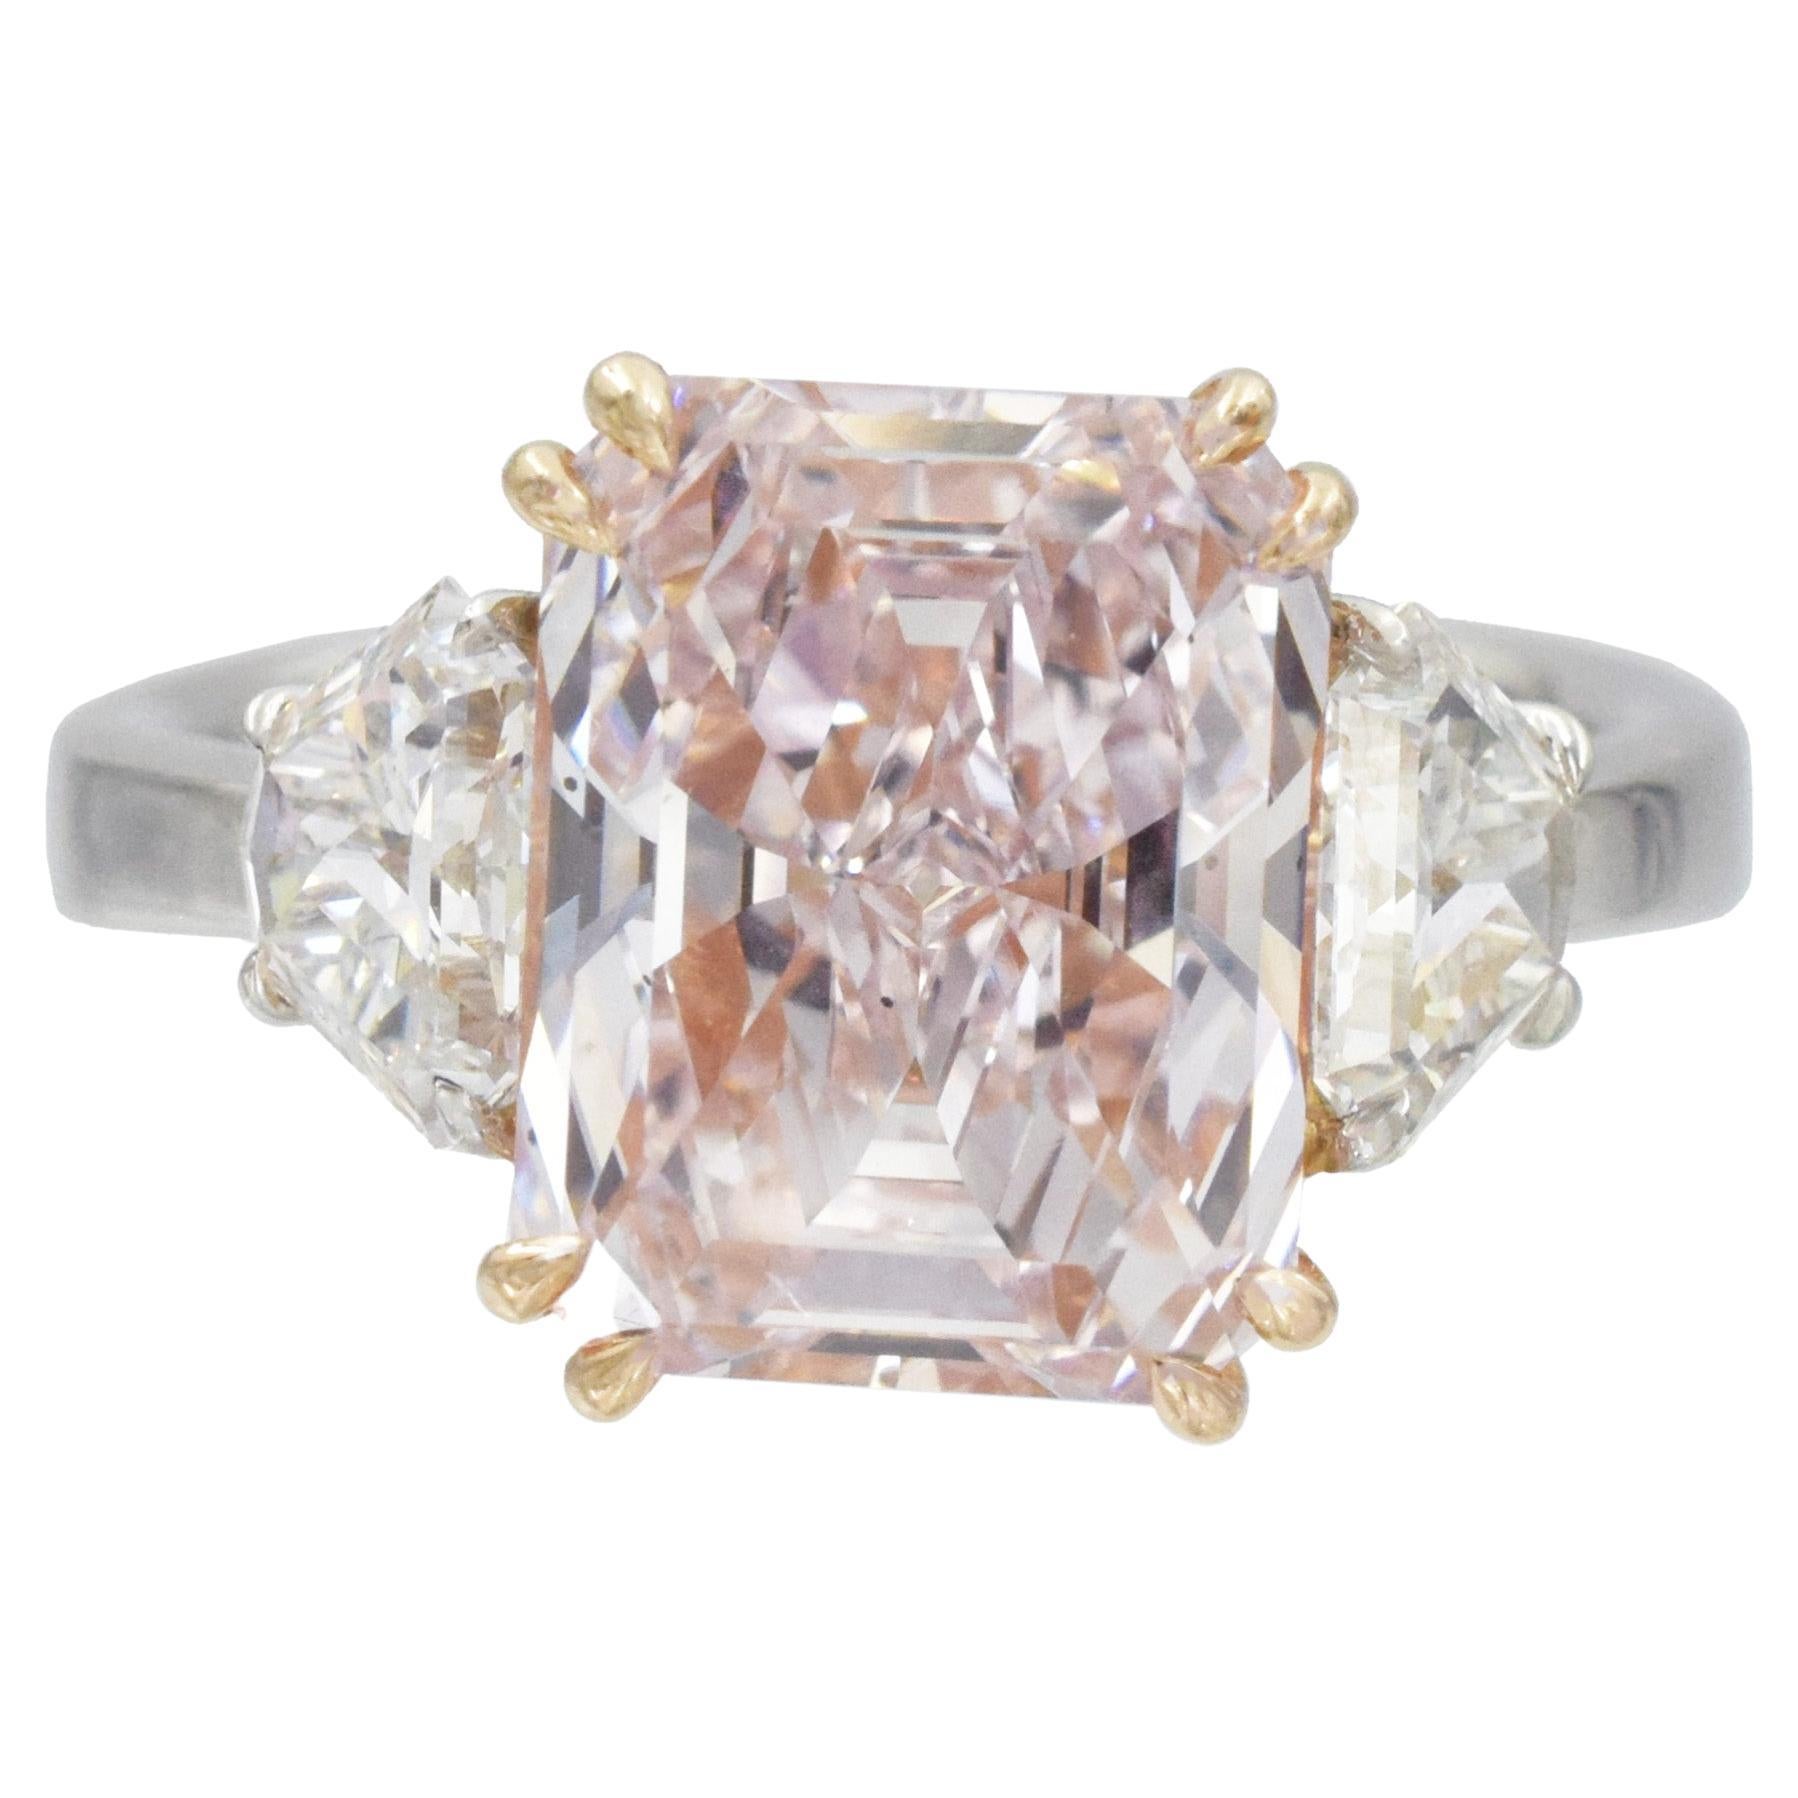  Natural GIA Certified Fancy Light Purplish Pink Diamond Ring 
This rectangular mixed cut diamond weighs 4.03 carat (Color: Fancy Light Purplish Pink, Clarity: SI1, GIA# ) set in 18k rose gold flanked by 2 kite shape diamonds weighing a total of